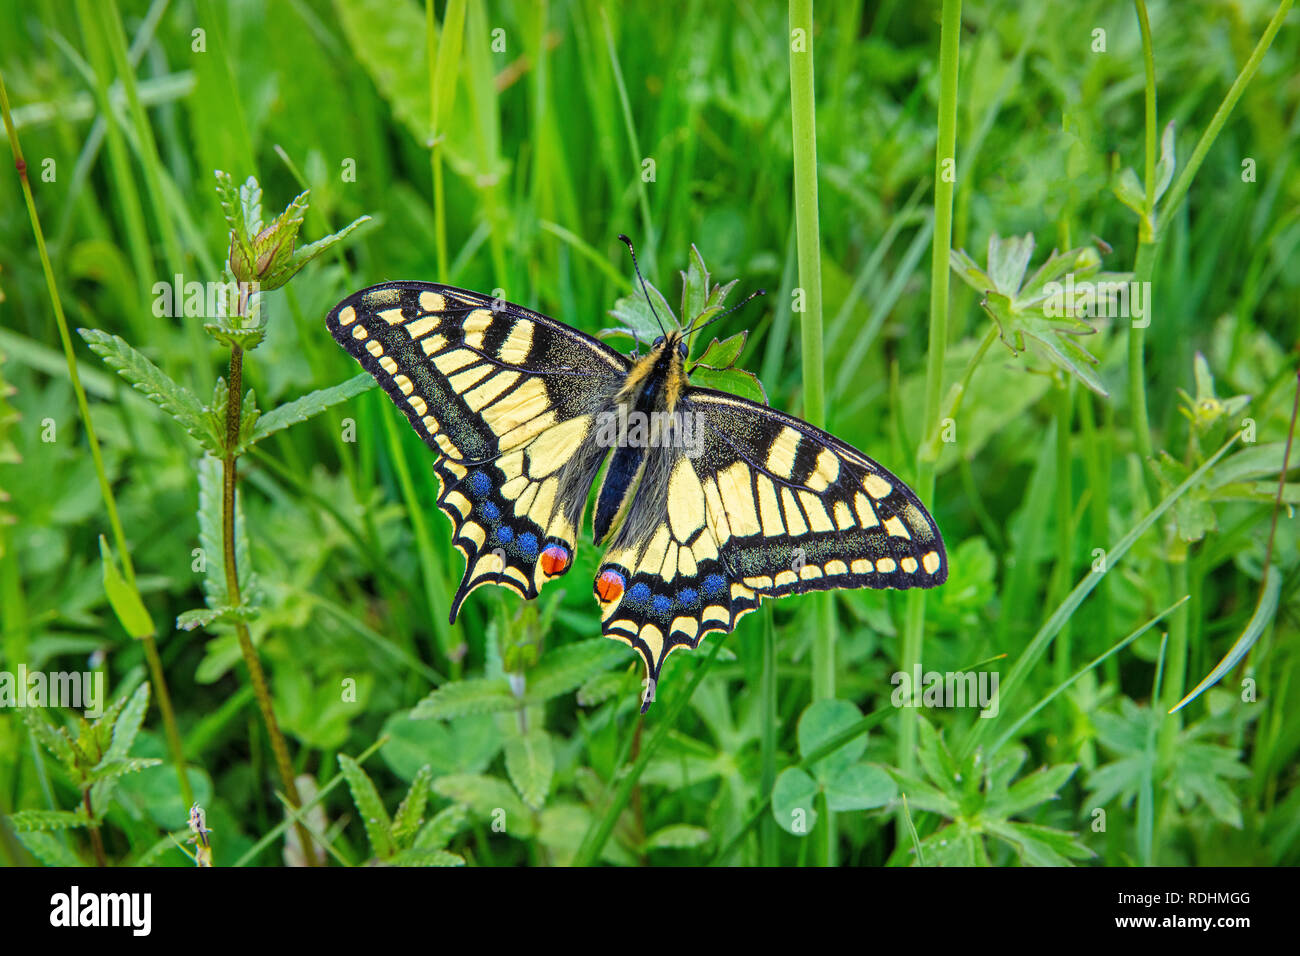 The Netherlands, Schimmert, Old World swallowtail or common yellow swallowtail (Papilio machaon) on Buttercup plant. Stock Photo